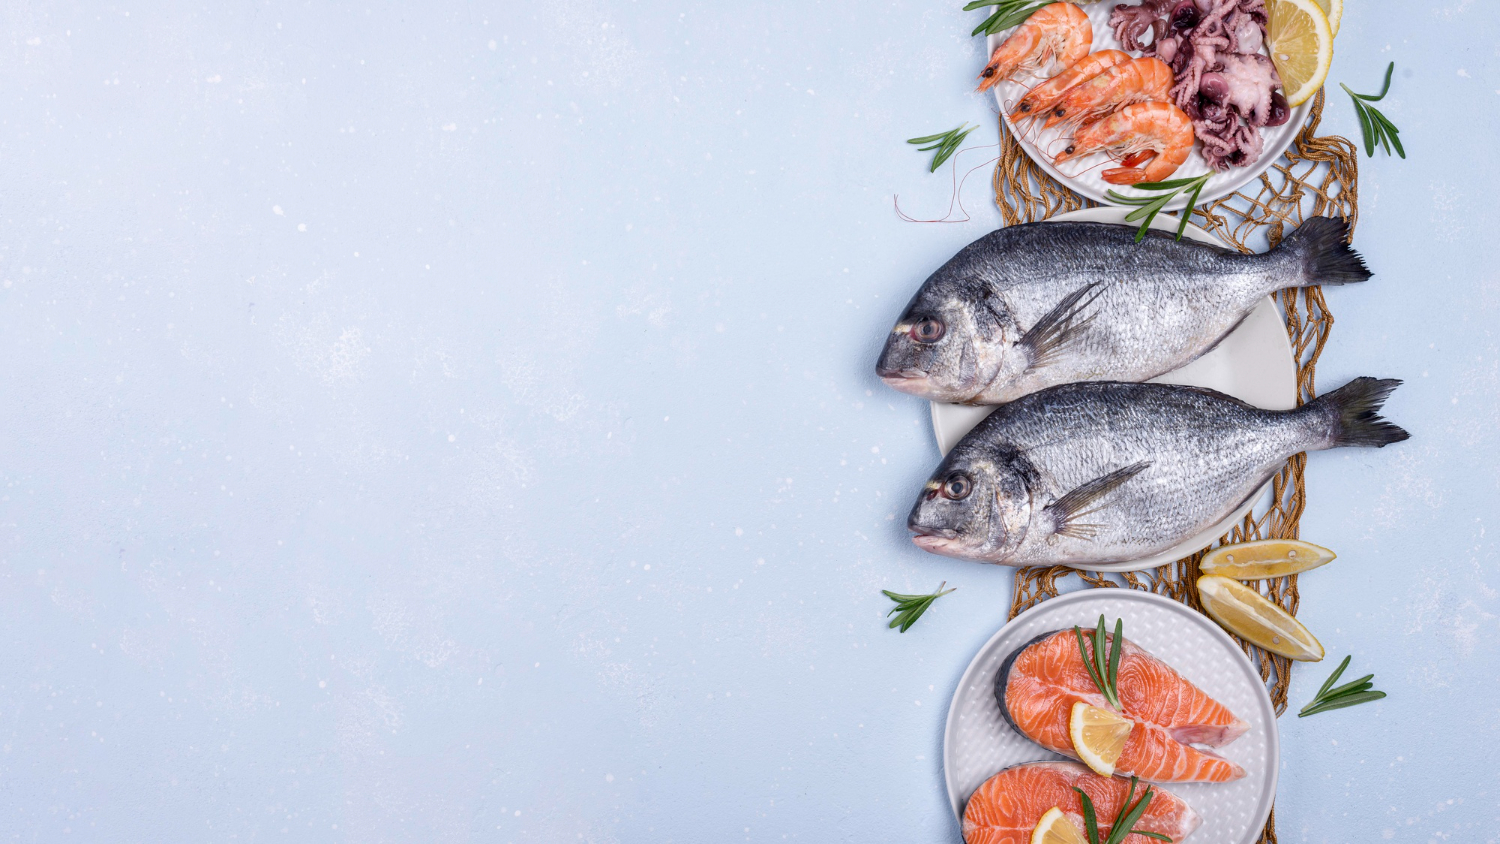 5 Essential Rules for Cooking Fish and Seafood